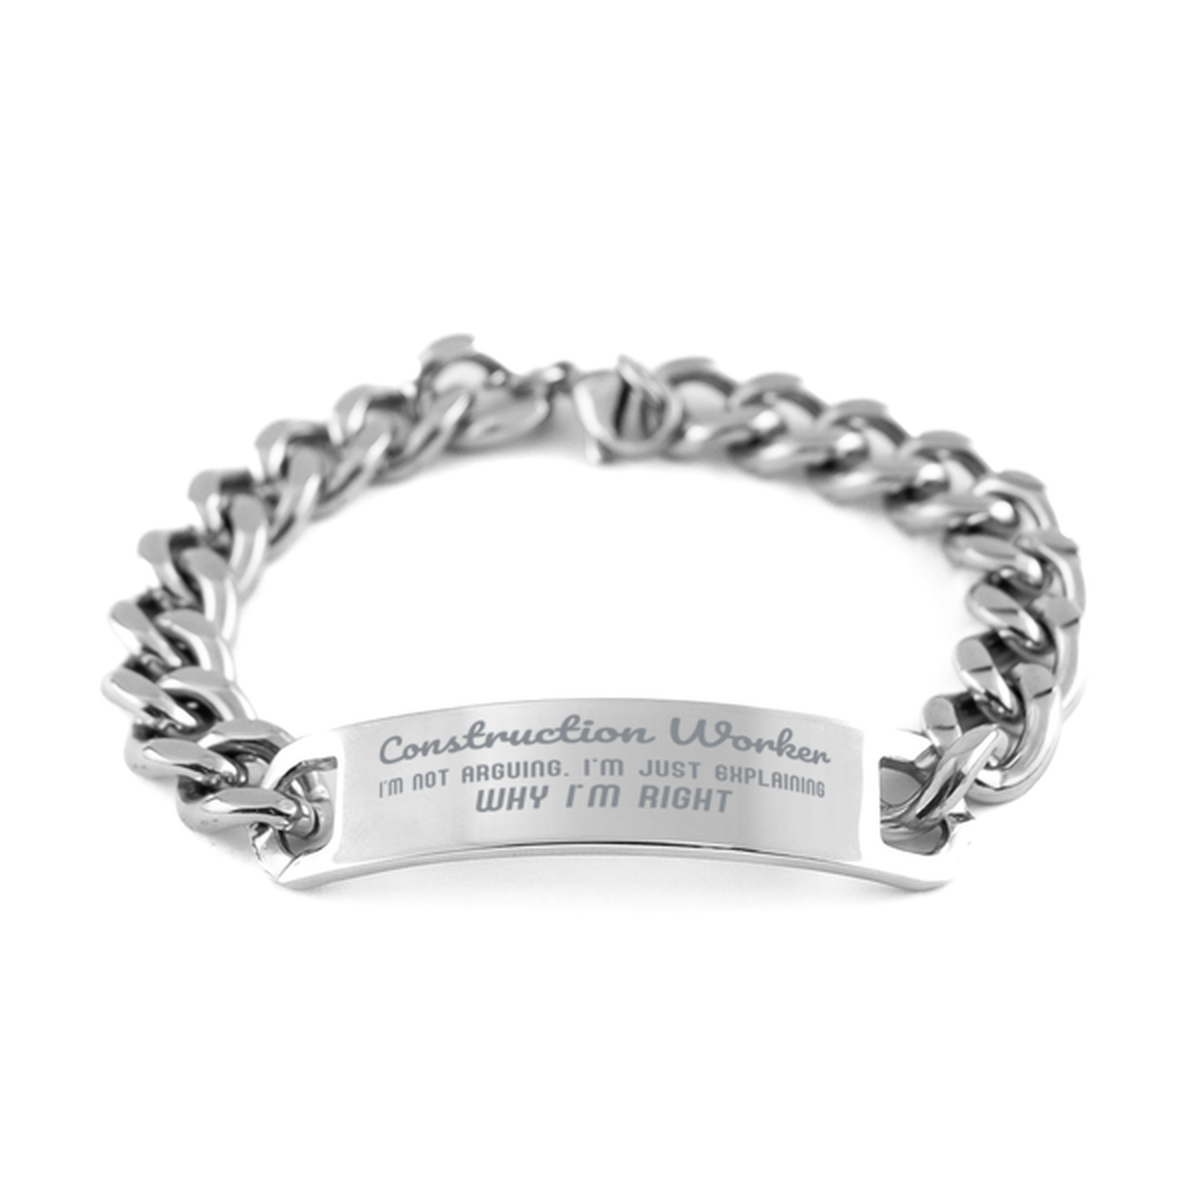 Construction Worker I'm not Arguing. I'm Just Explaining Why I'm RIGHT Cuban Chain Stainless Steel Bracelet, Graduation Birthday Christmas Construction Worker Gifts For Construction Worker Funny Saying Quote Present for Men Women Coworker